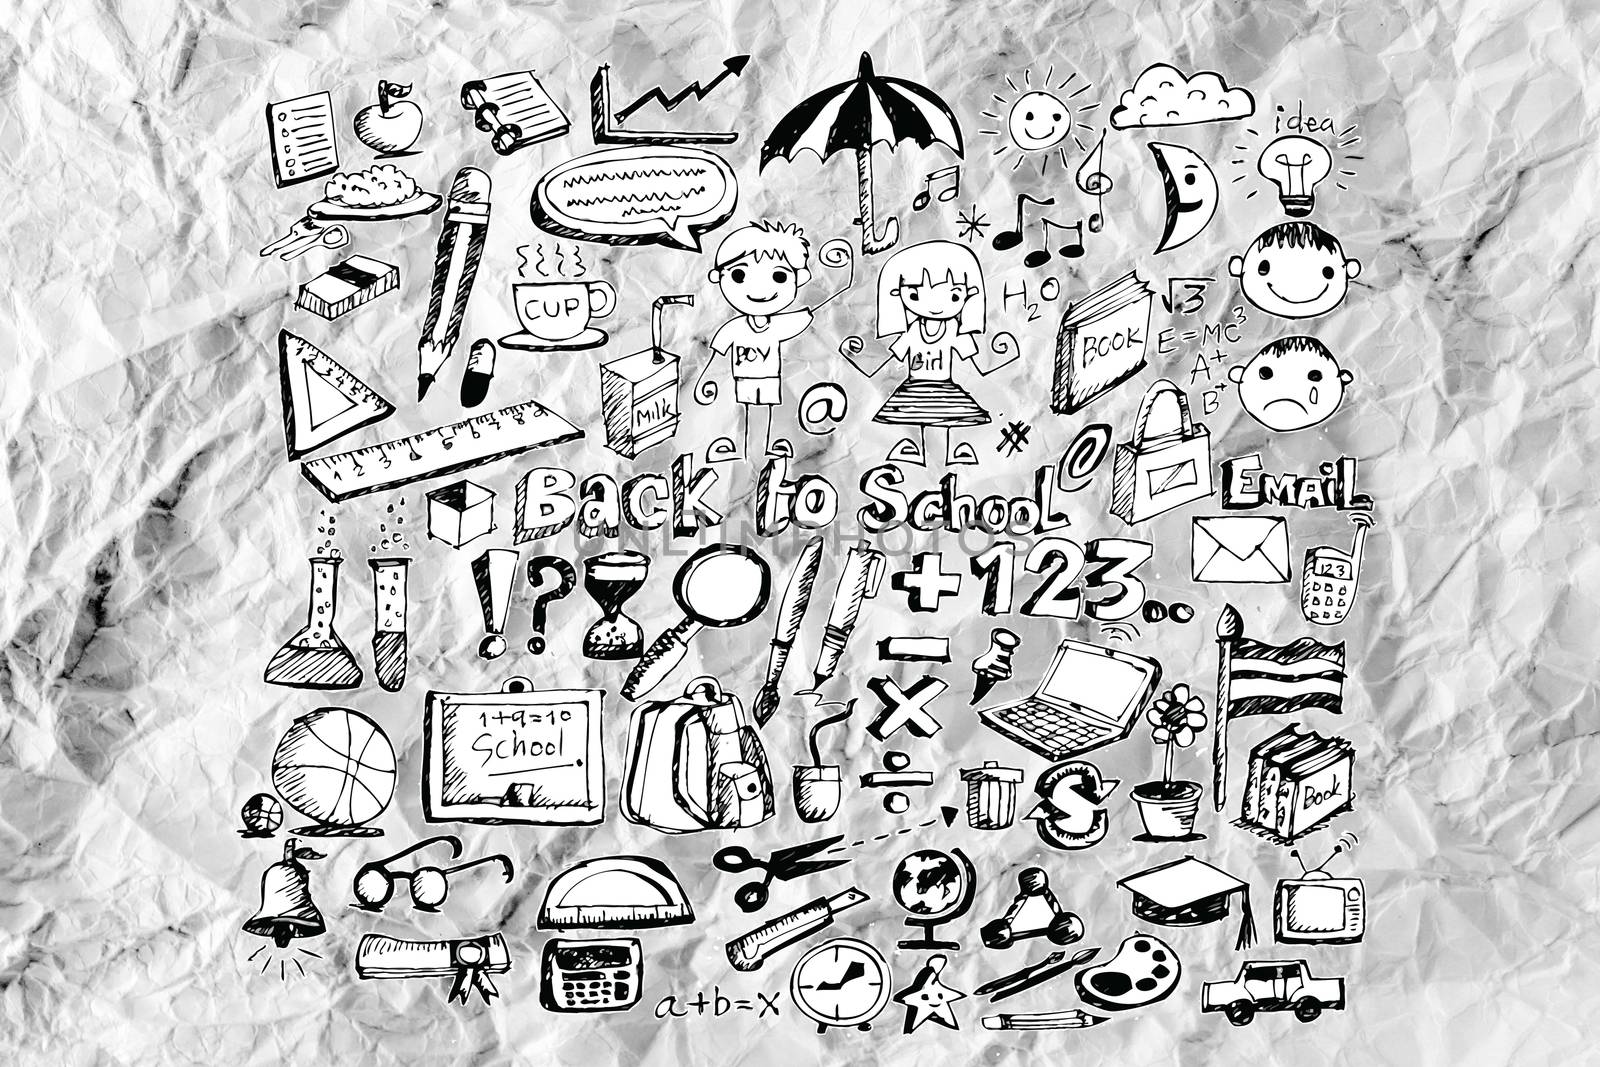 Hand doodle Business icon set idea design on crumpled paper by kiddaikiddee